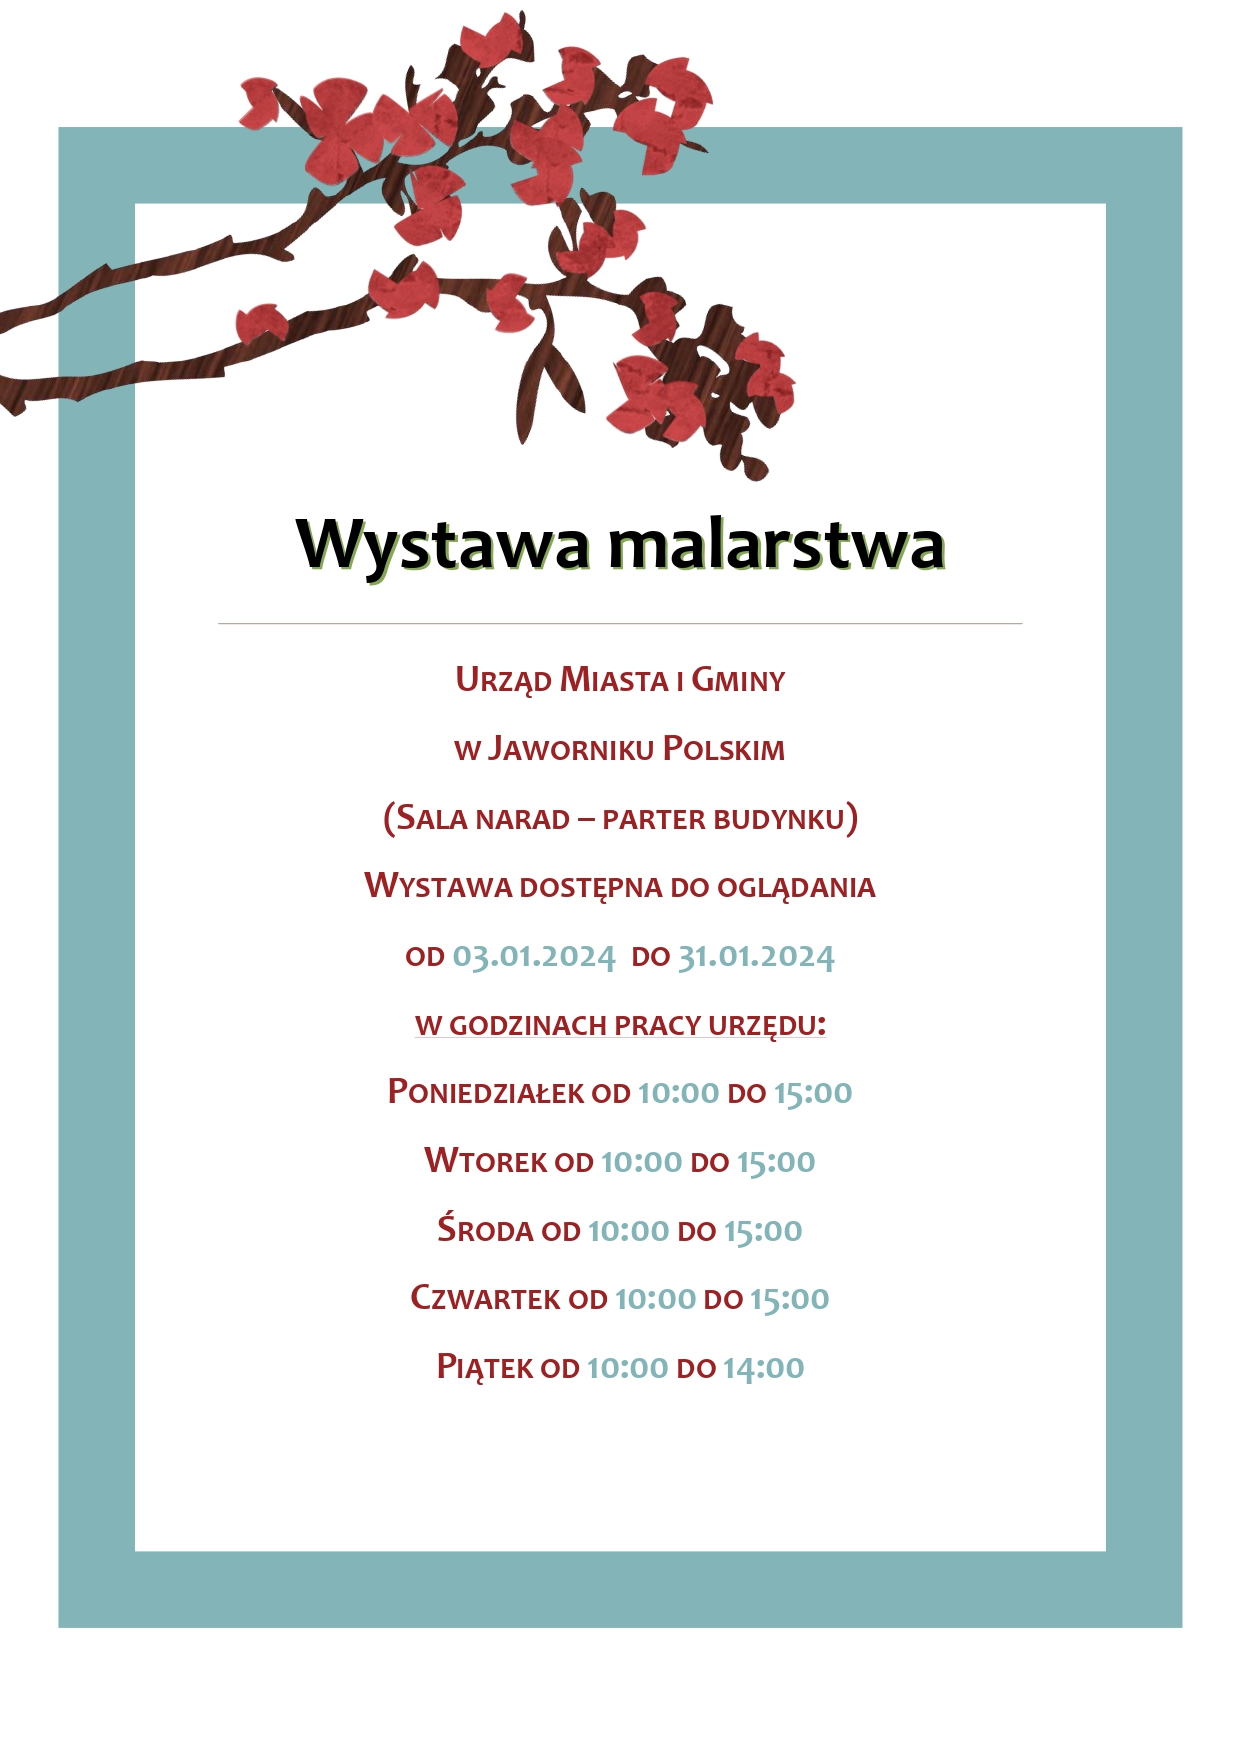 Read more about the article Wystawa malarstwa